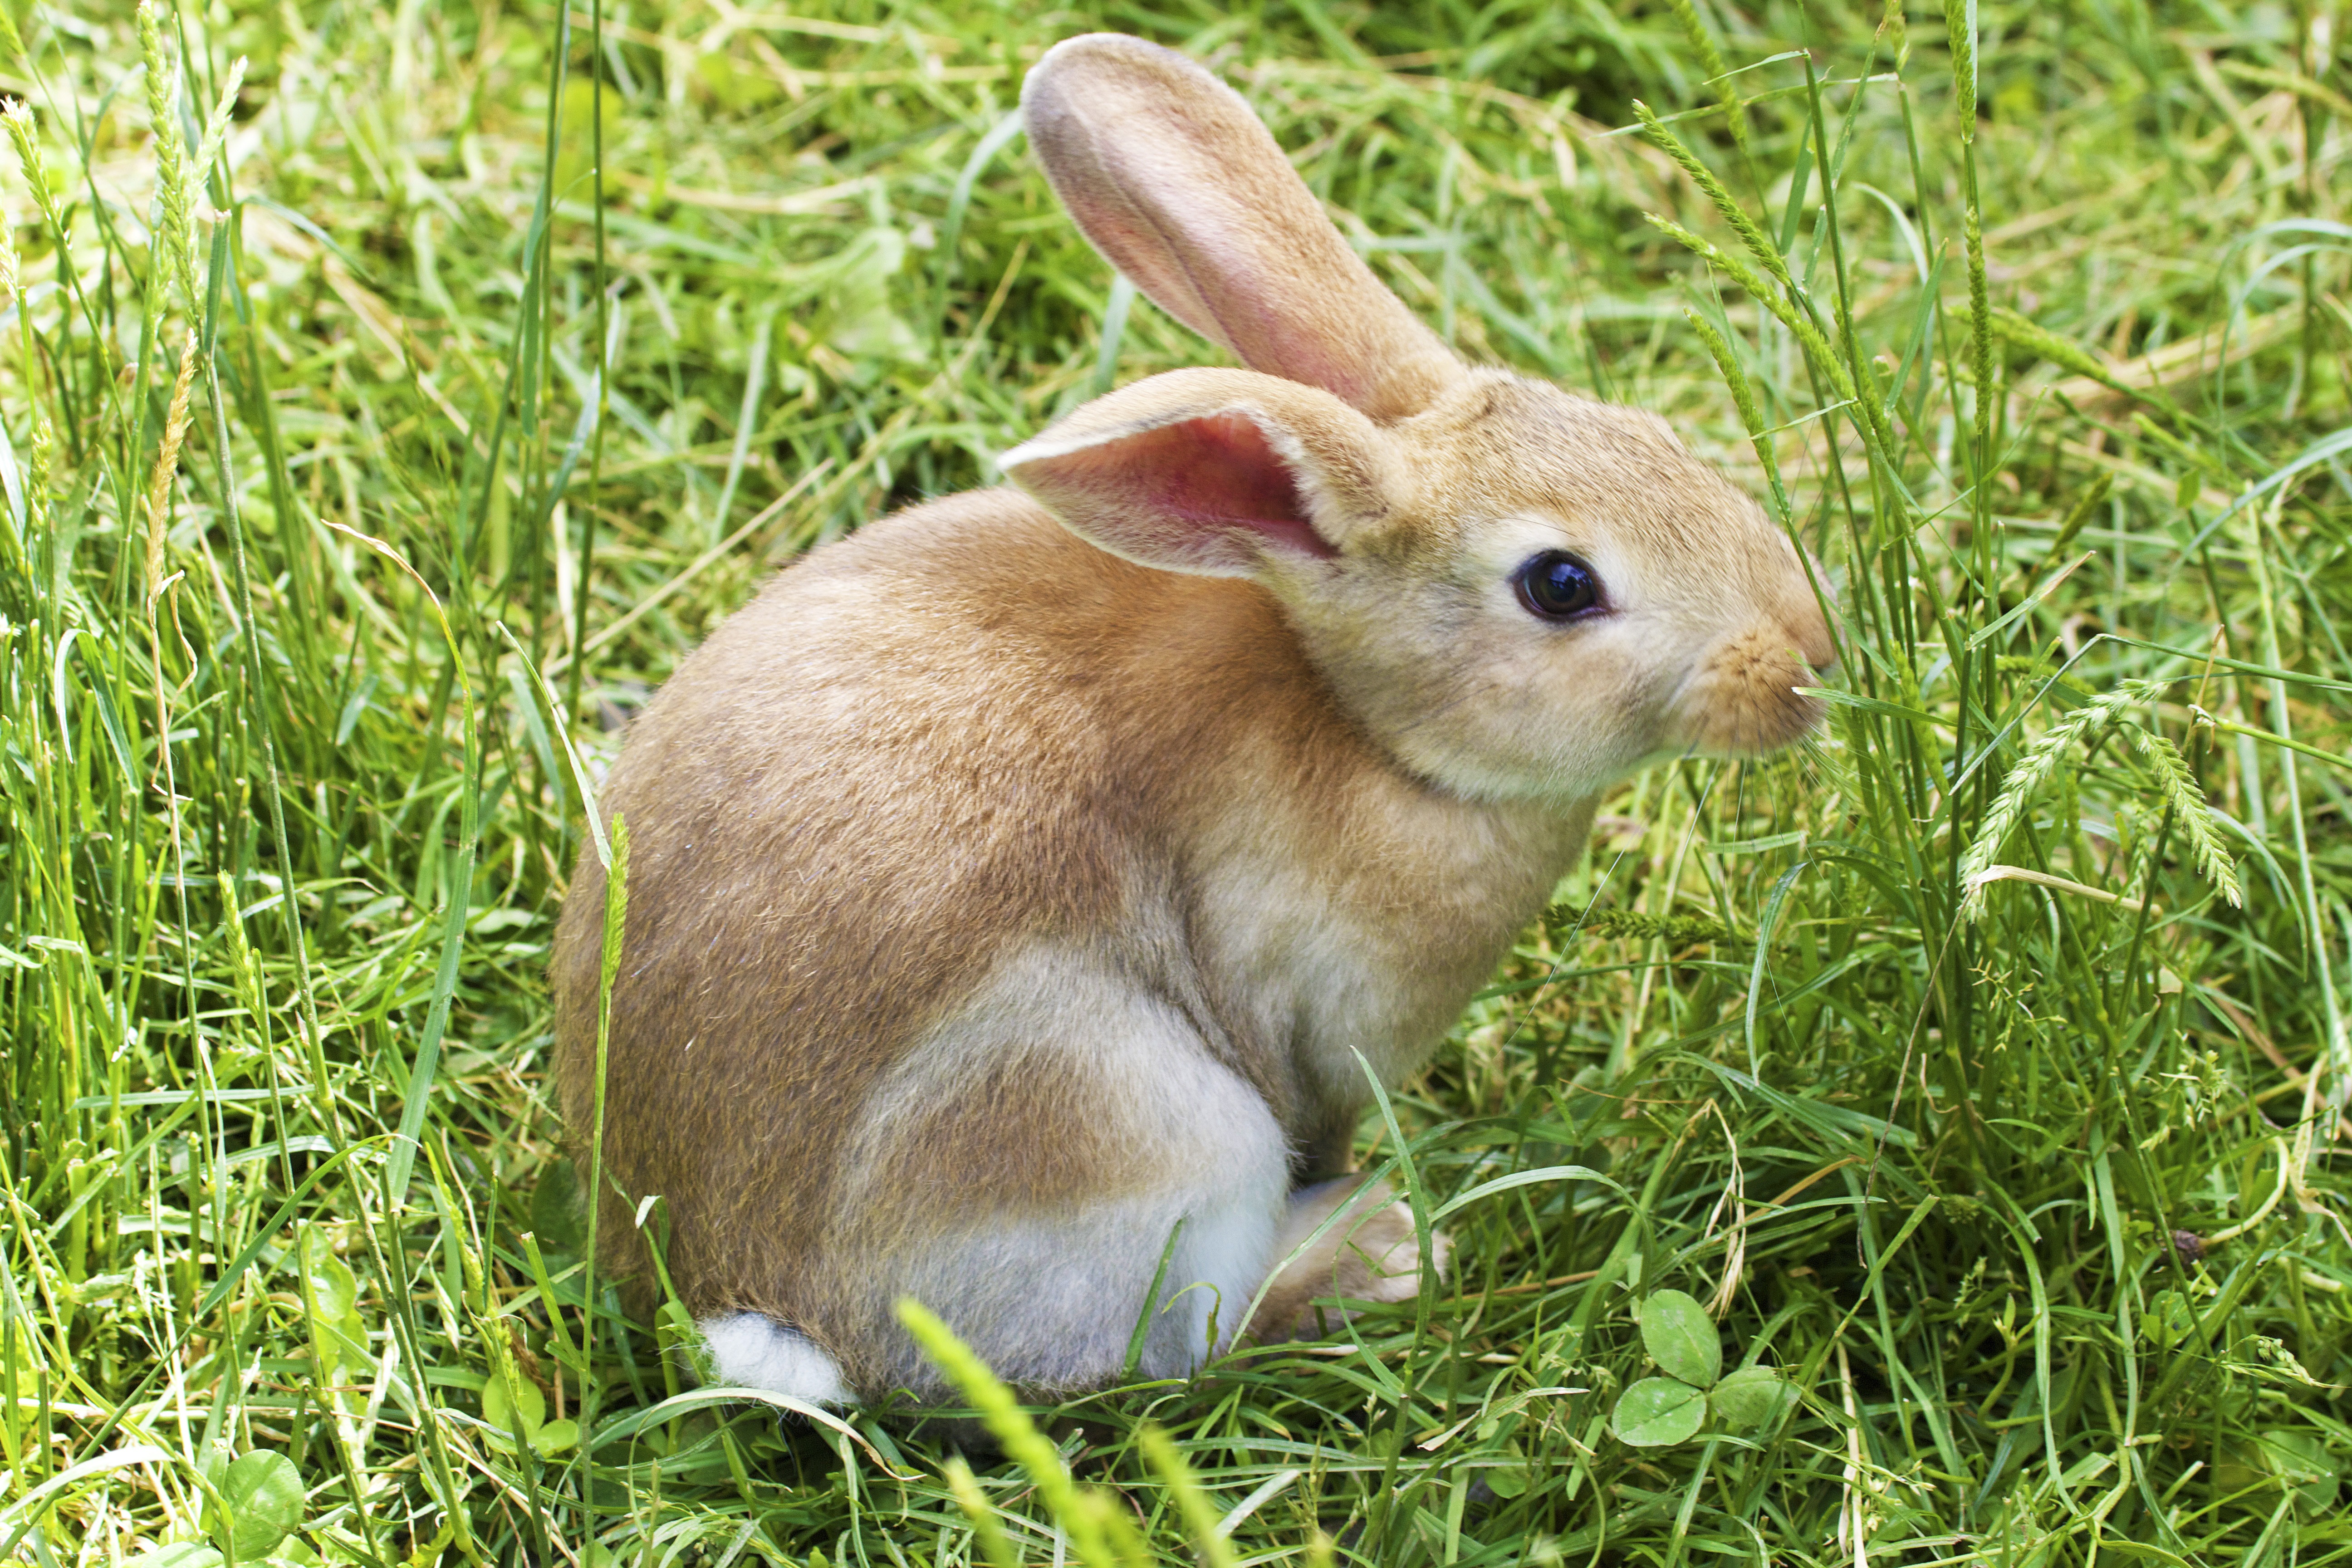 A rabbit in the grass